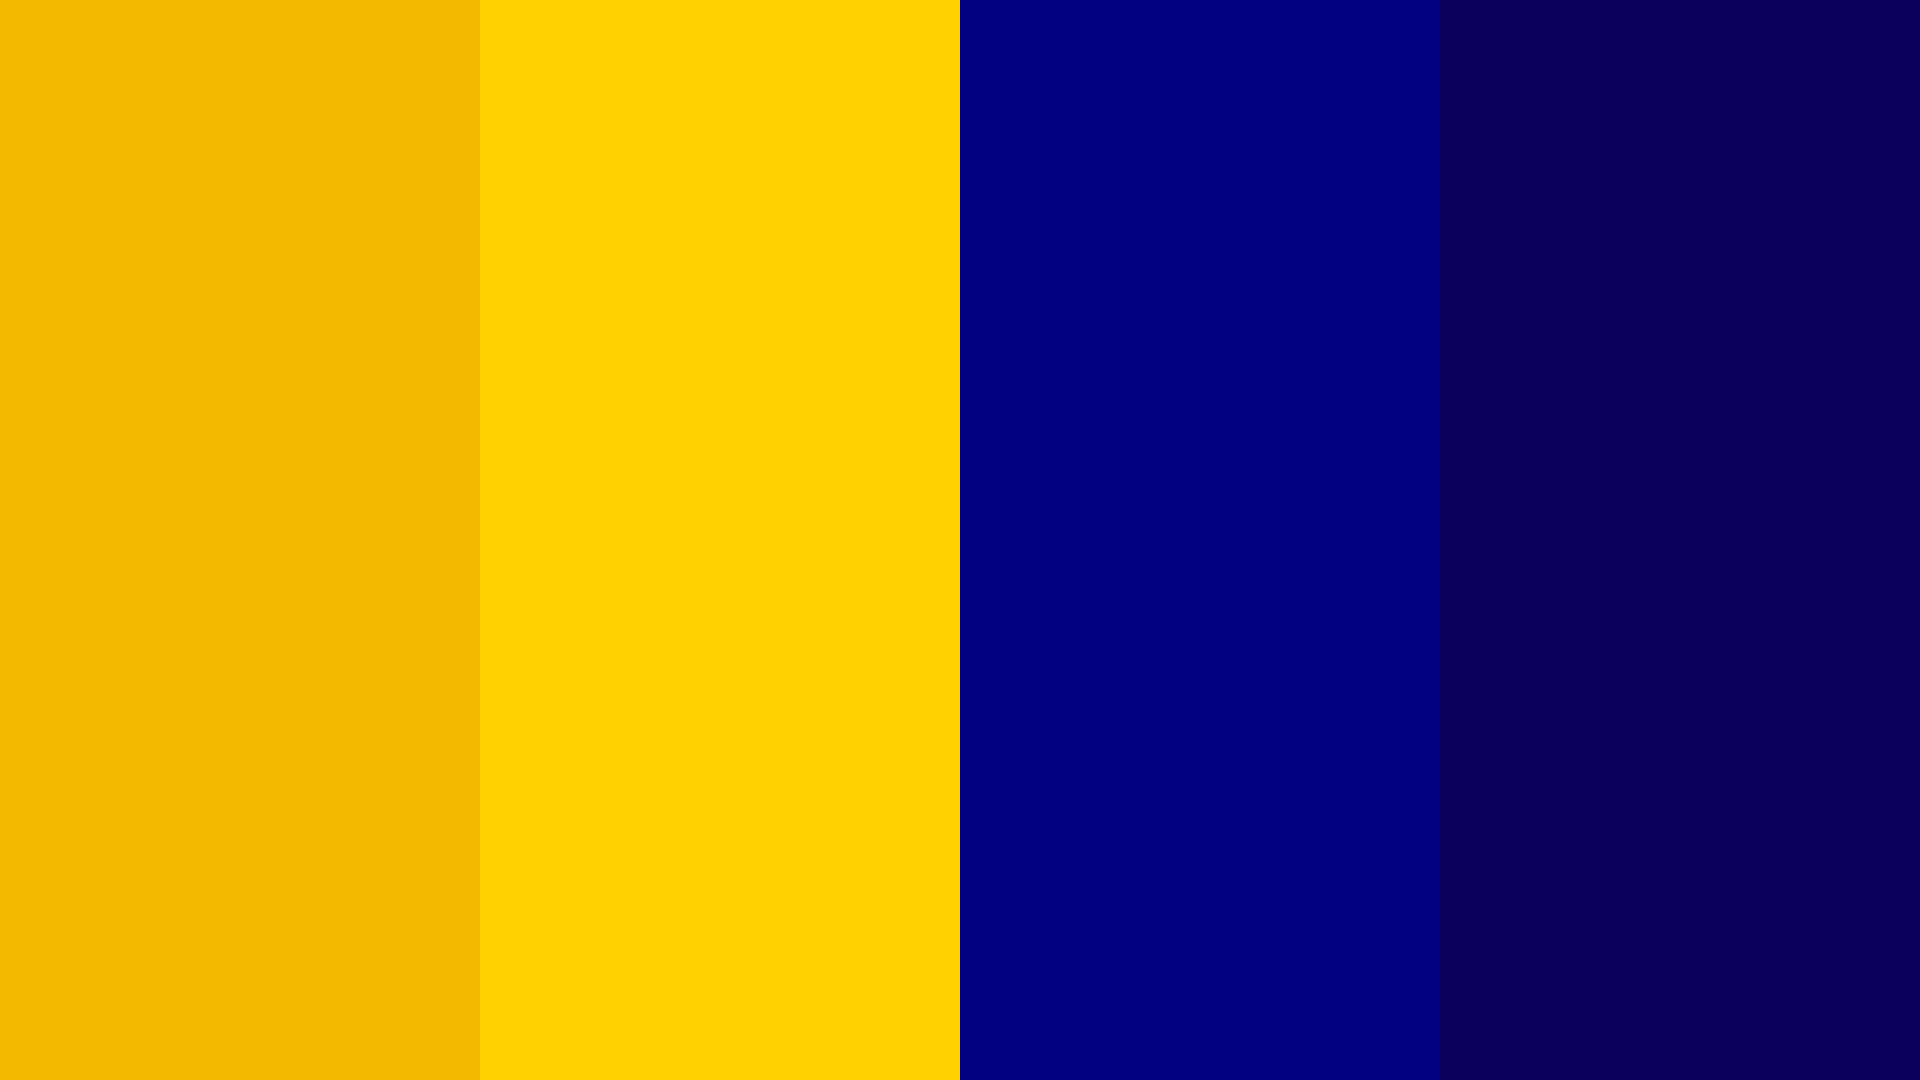 Navy Blue and Yellow Wallpapers - Top Free Navy Blue and Yellow ...